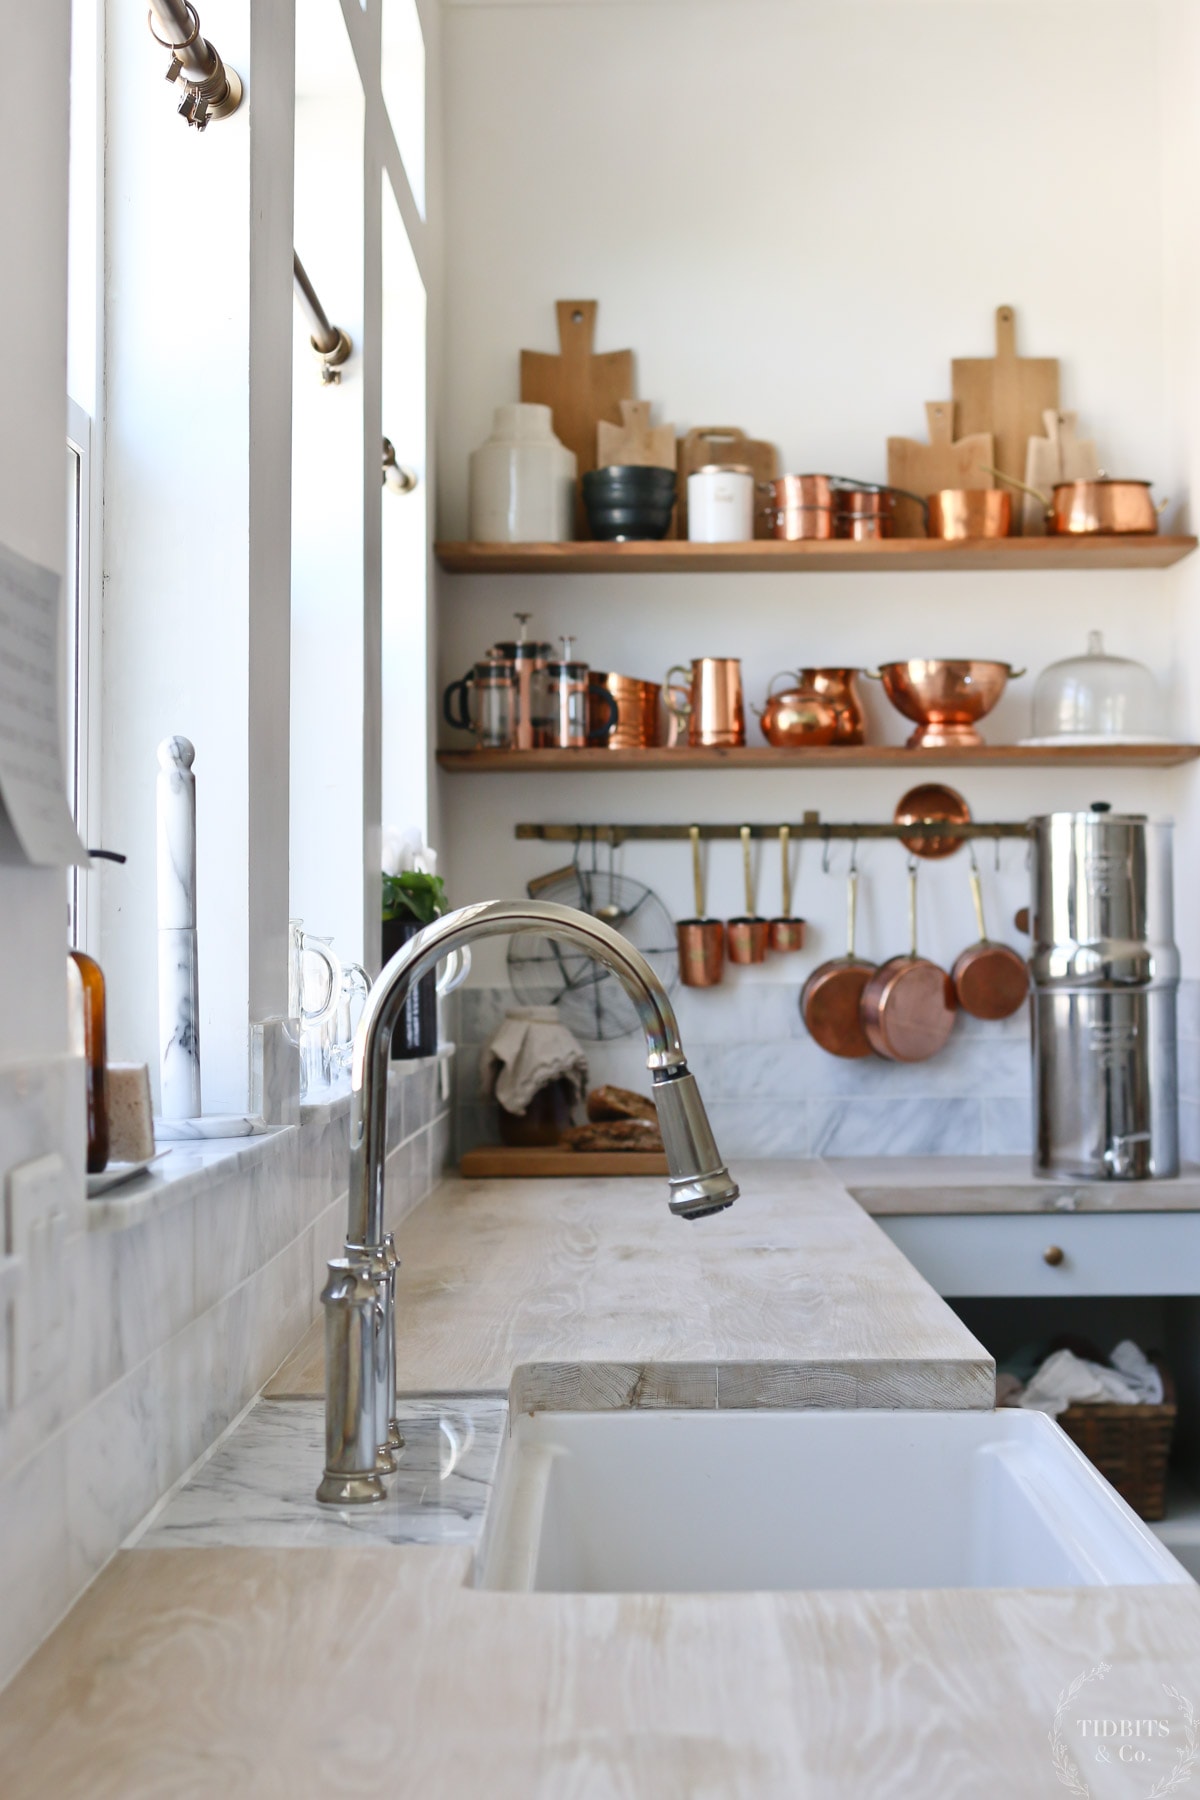 A shot of a kitchen sink, butcher block countertops and open shelving in a farmhouse kitchen